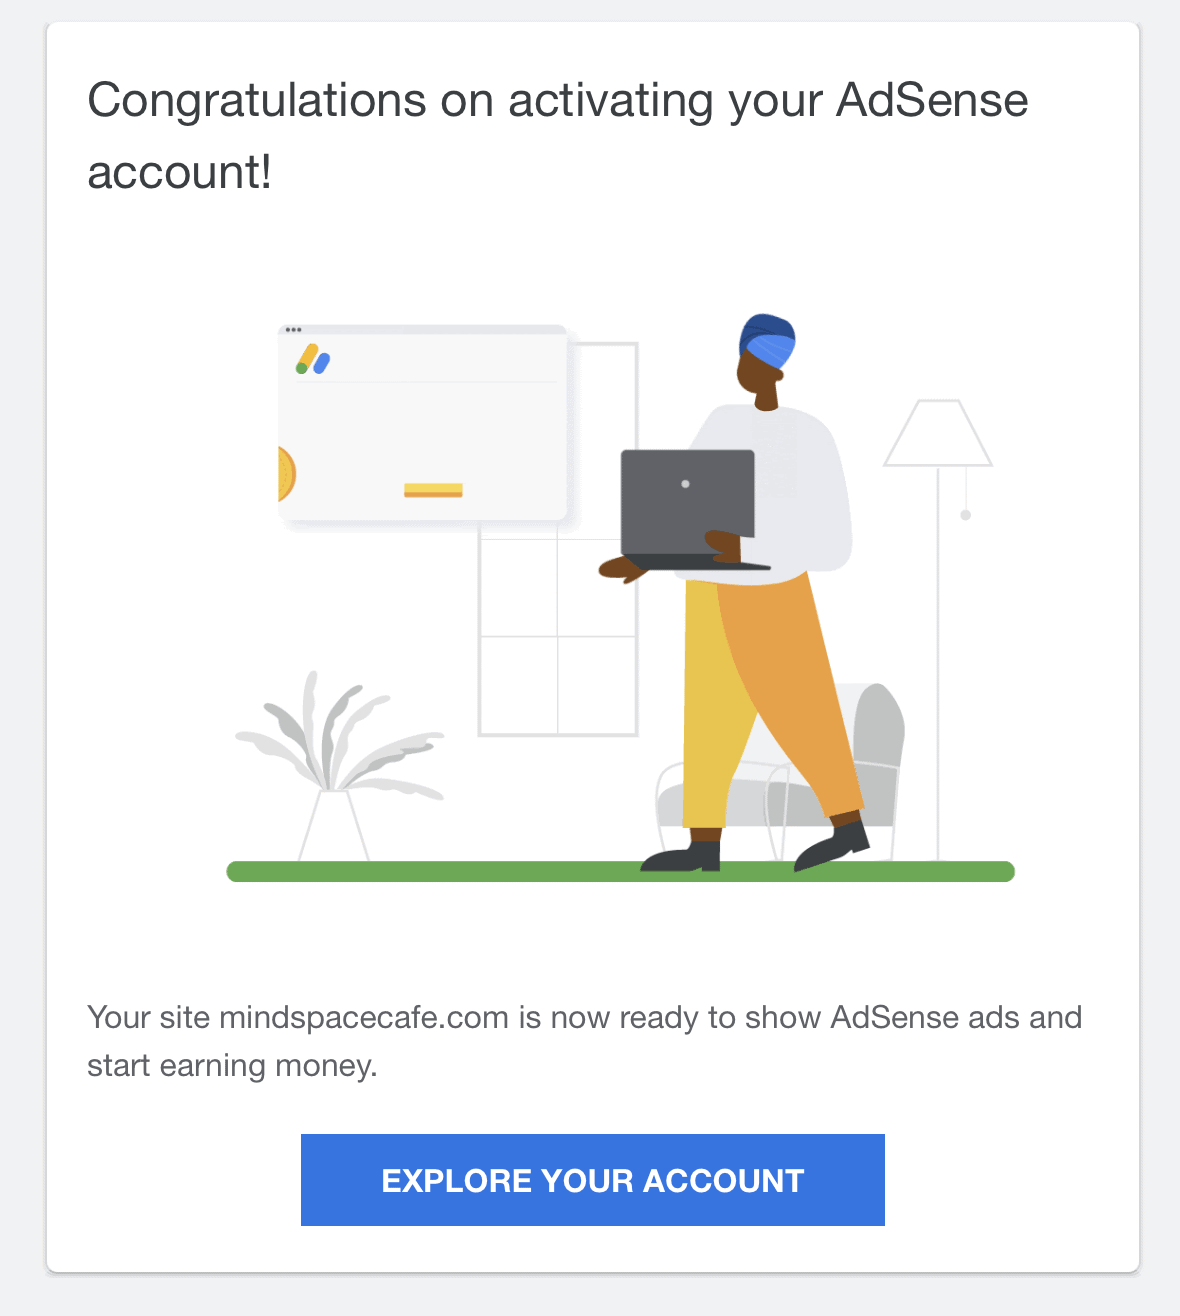 You will get an email like this once you get adsense approval from google